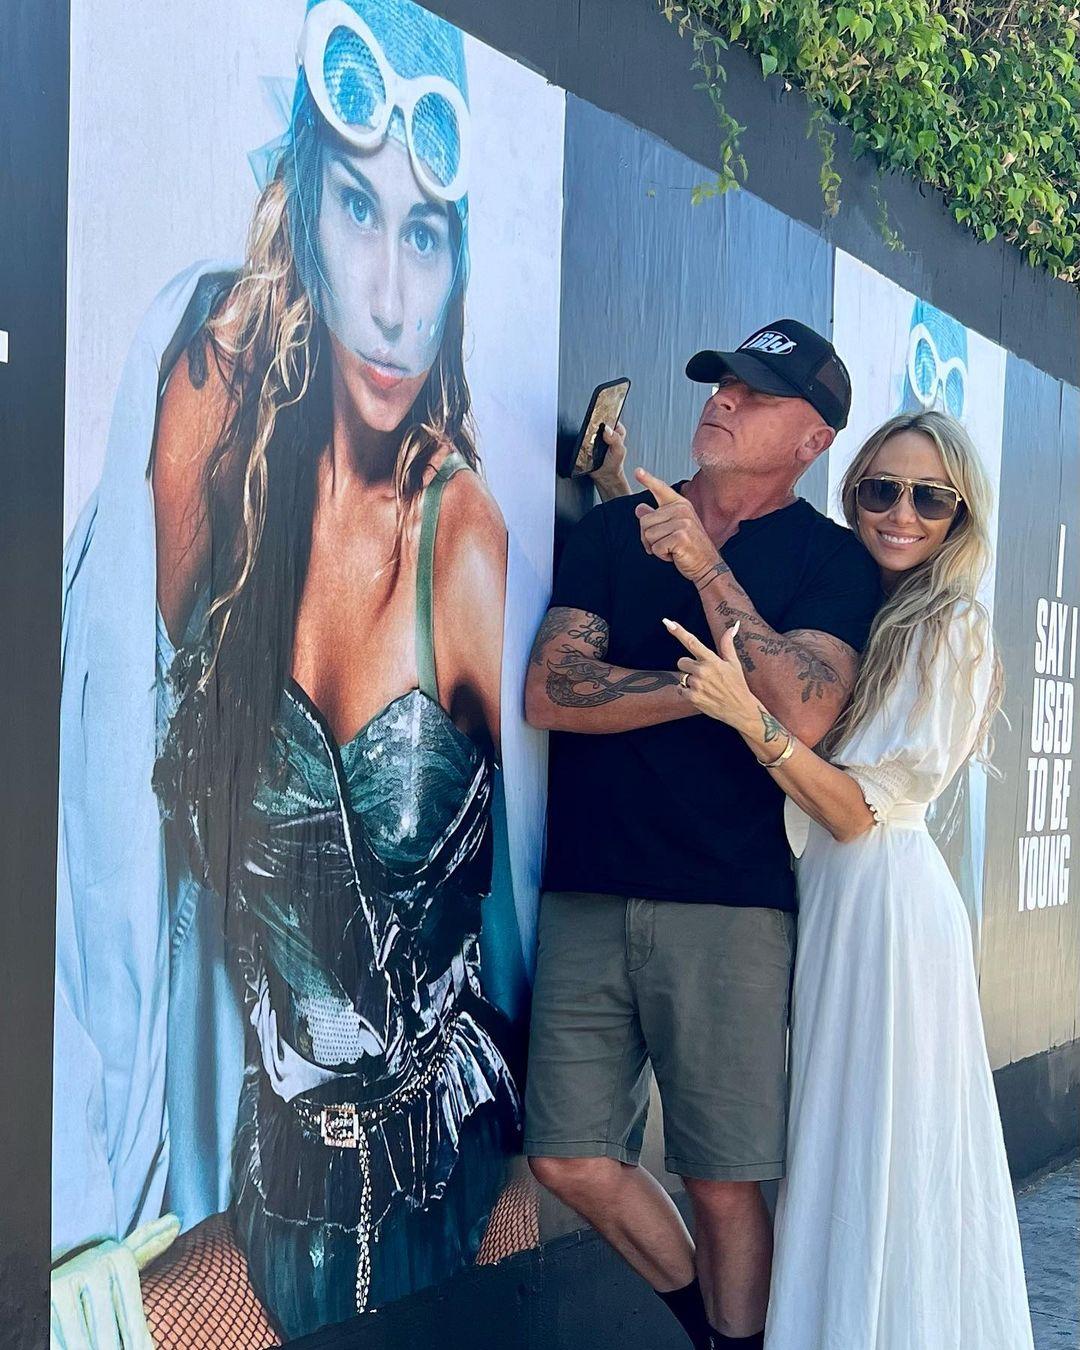 Tish Cyrus and Dominic Purcell support Miley Cyrus' new song